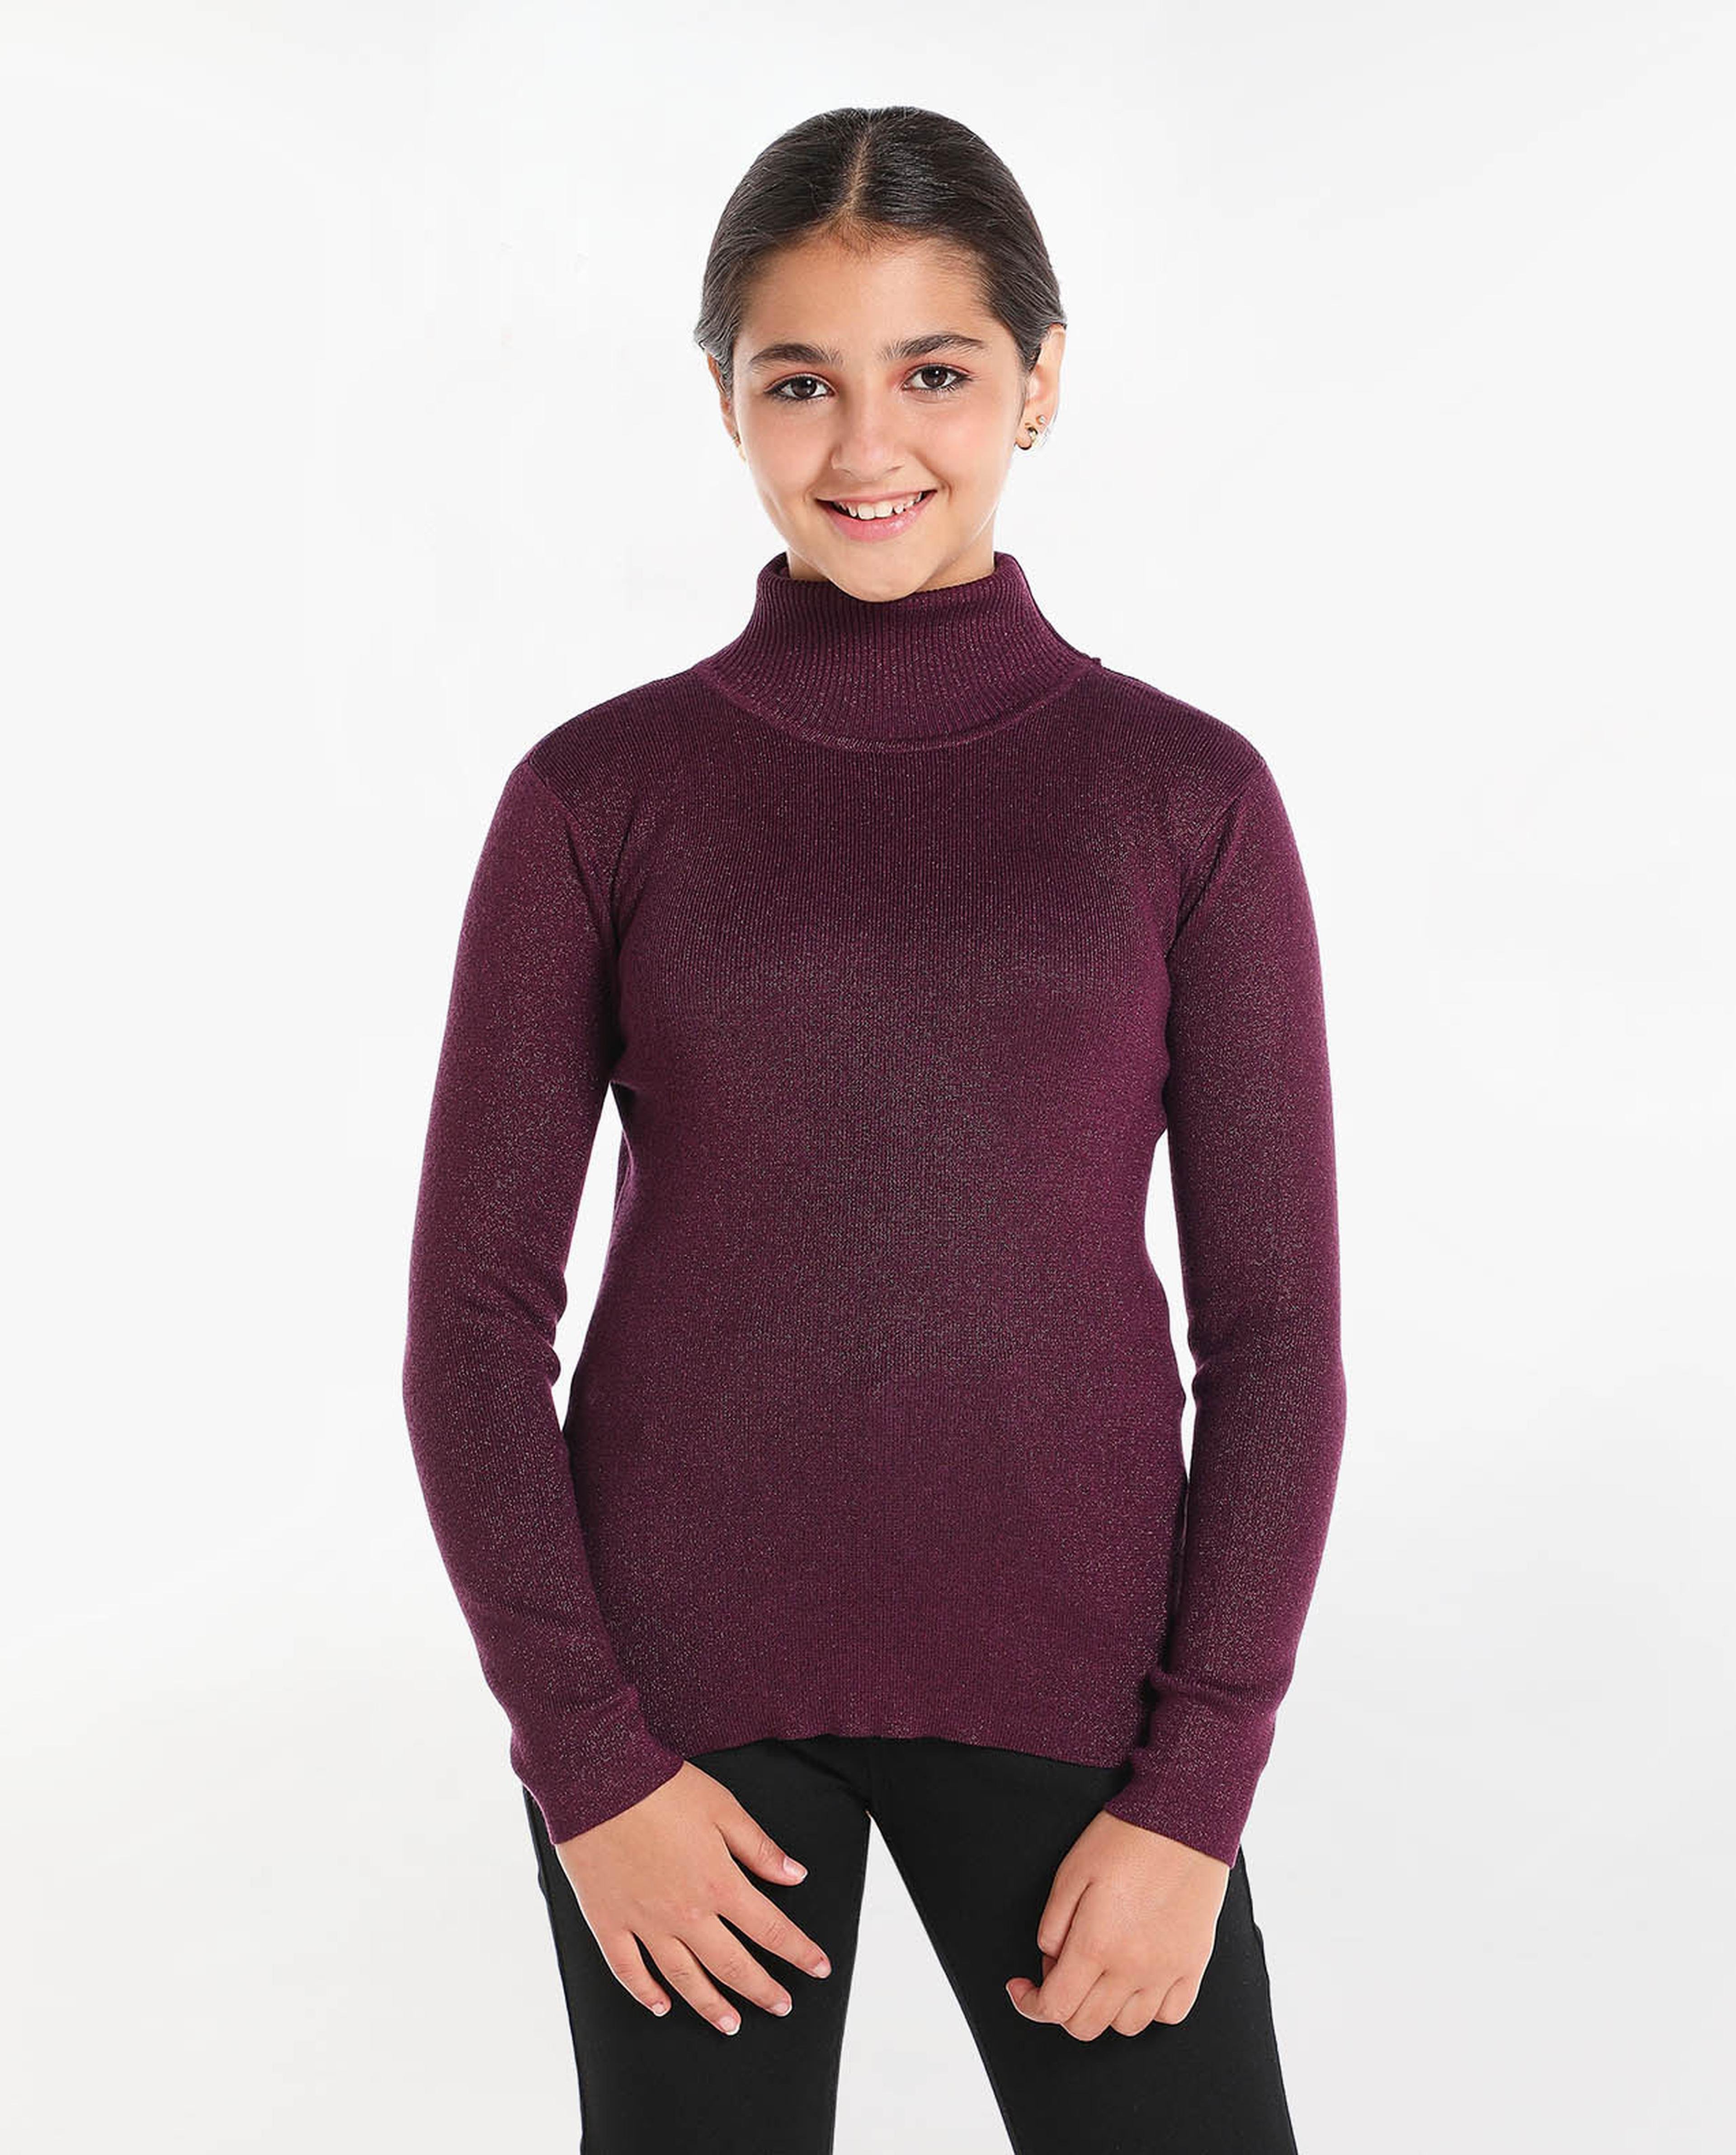 Solid Sweatshirt with Turtle Neck and Long Sleeves